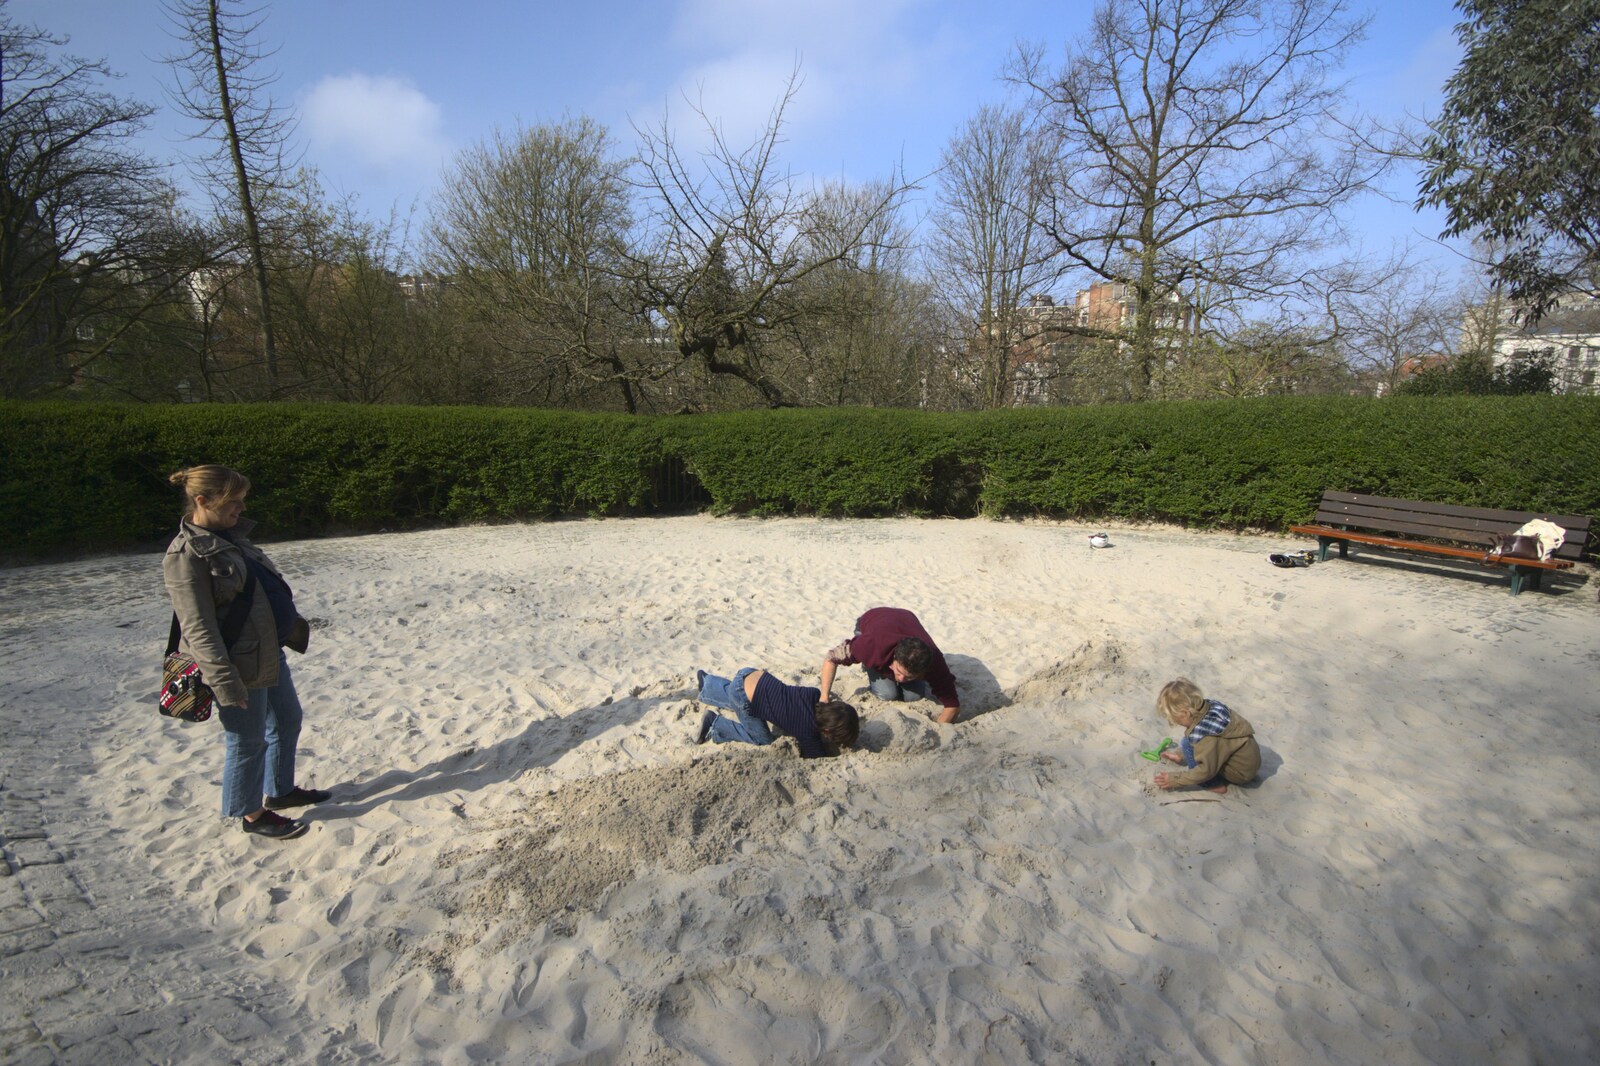 The boys are in a Brussel's sand pit from A Day Trip to Brussels, Belgium - 5th April 2009